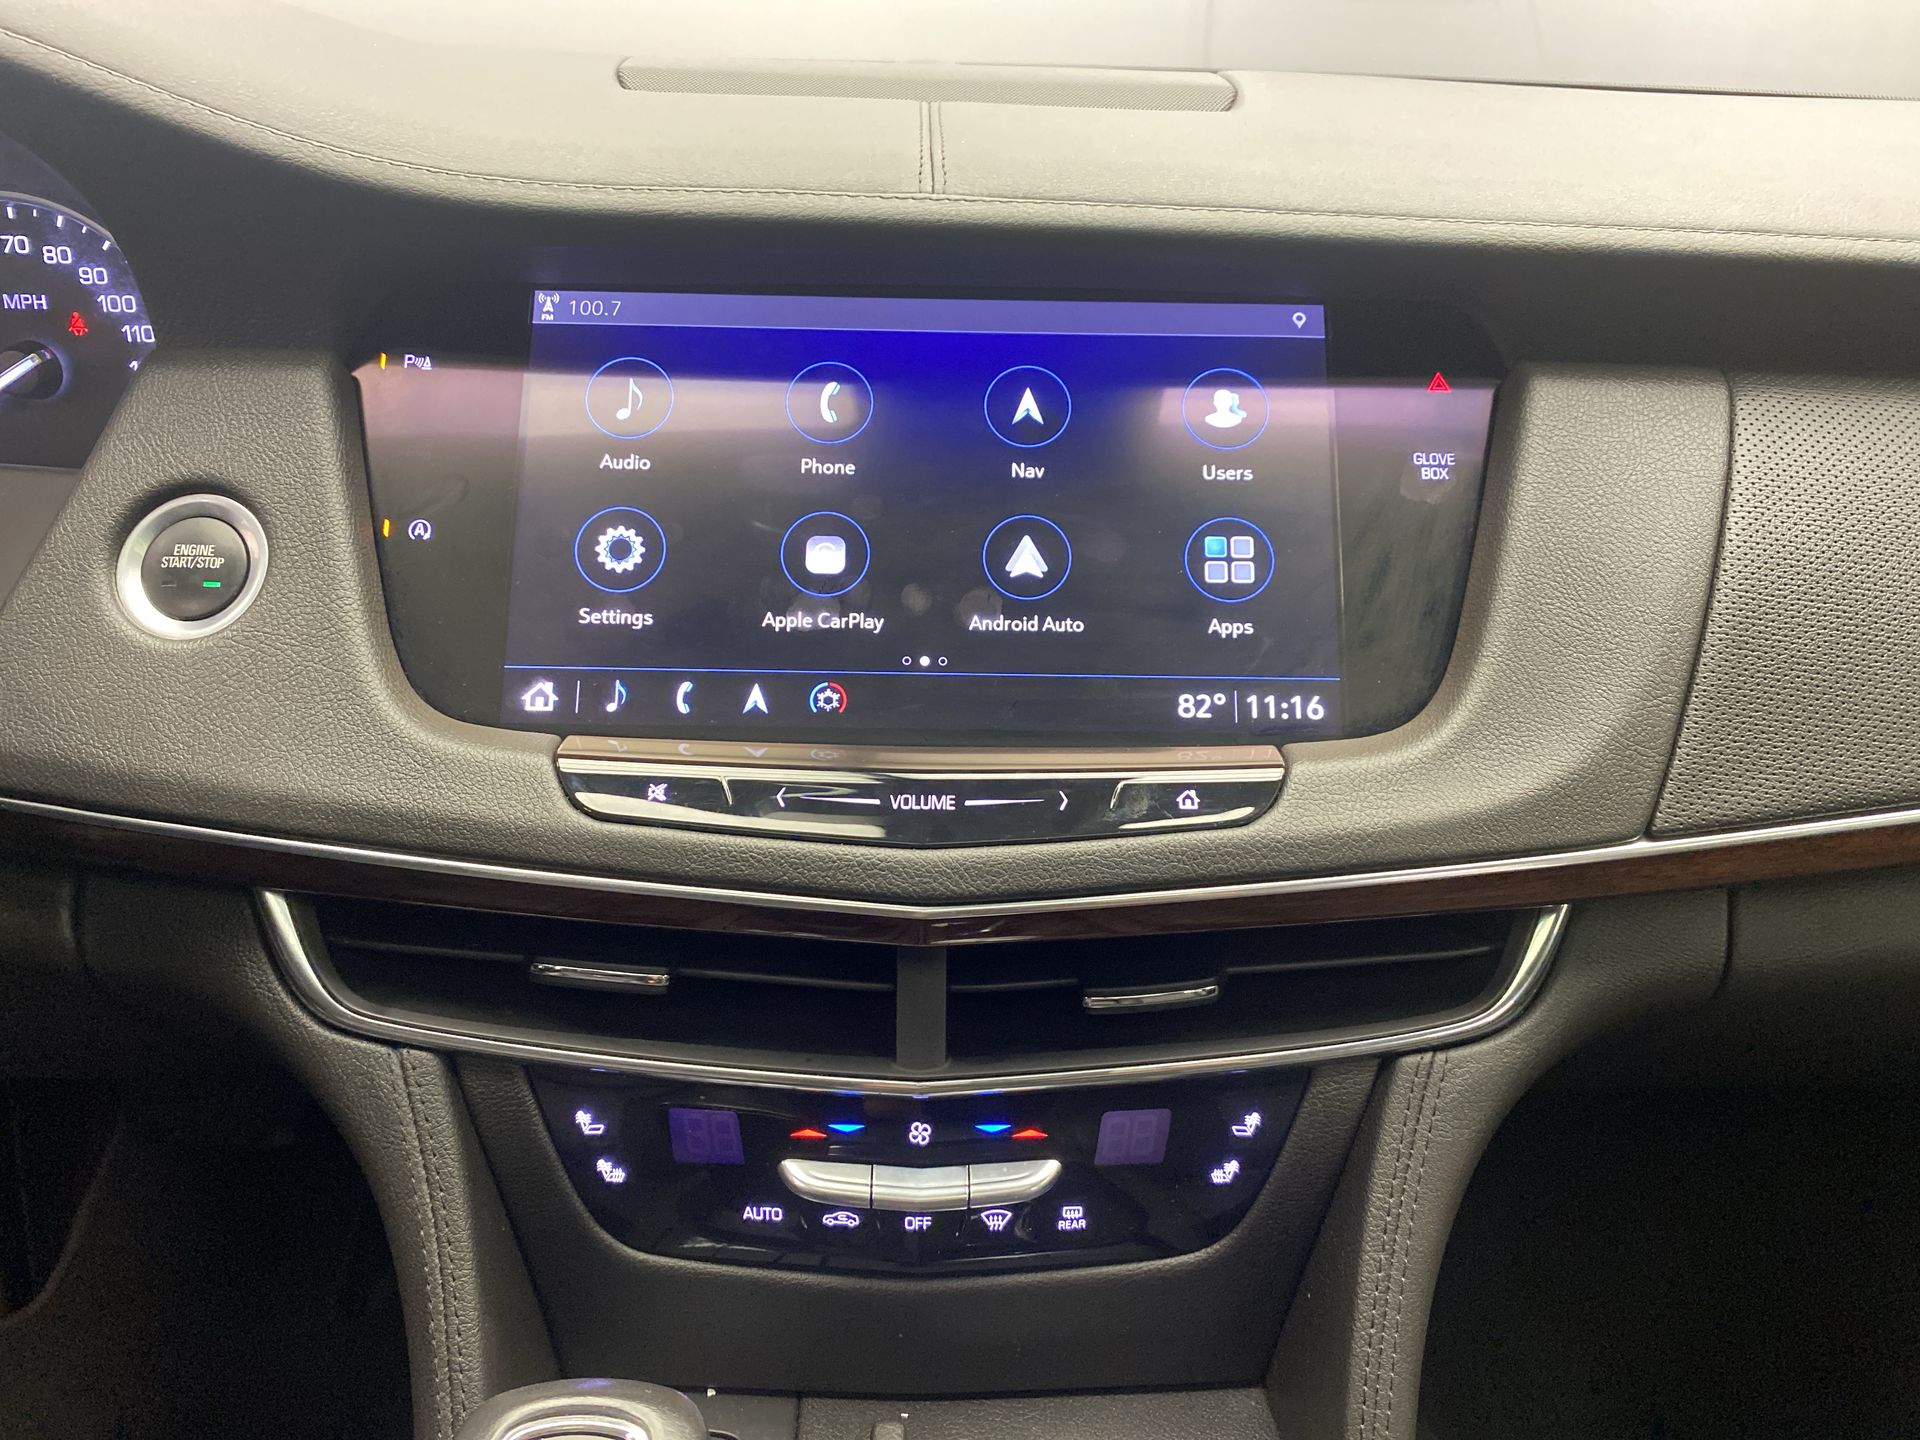 Used 2019 Cadillac CT6 For Sale ($43,999) | Vroom